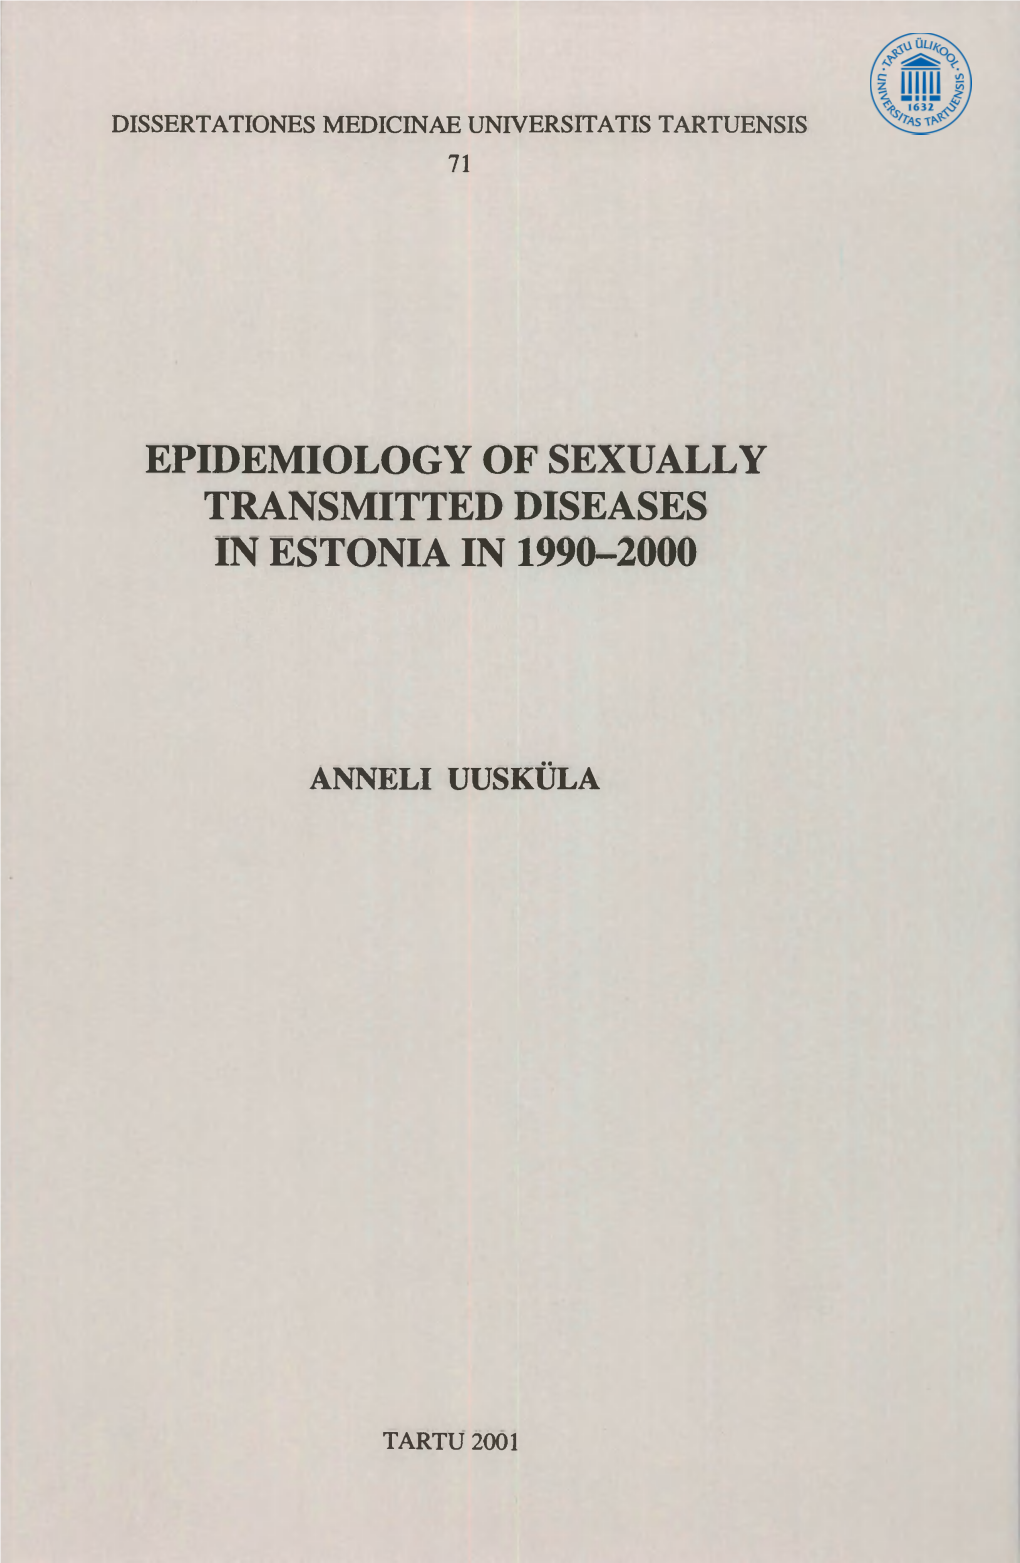 Epidemiology of Sexually Transmitted Diseases in Estonia in 1990-2000